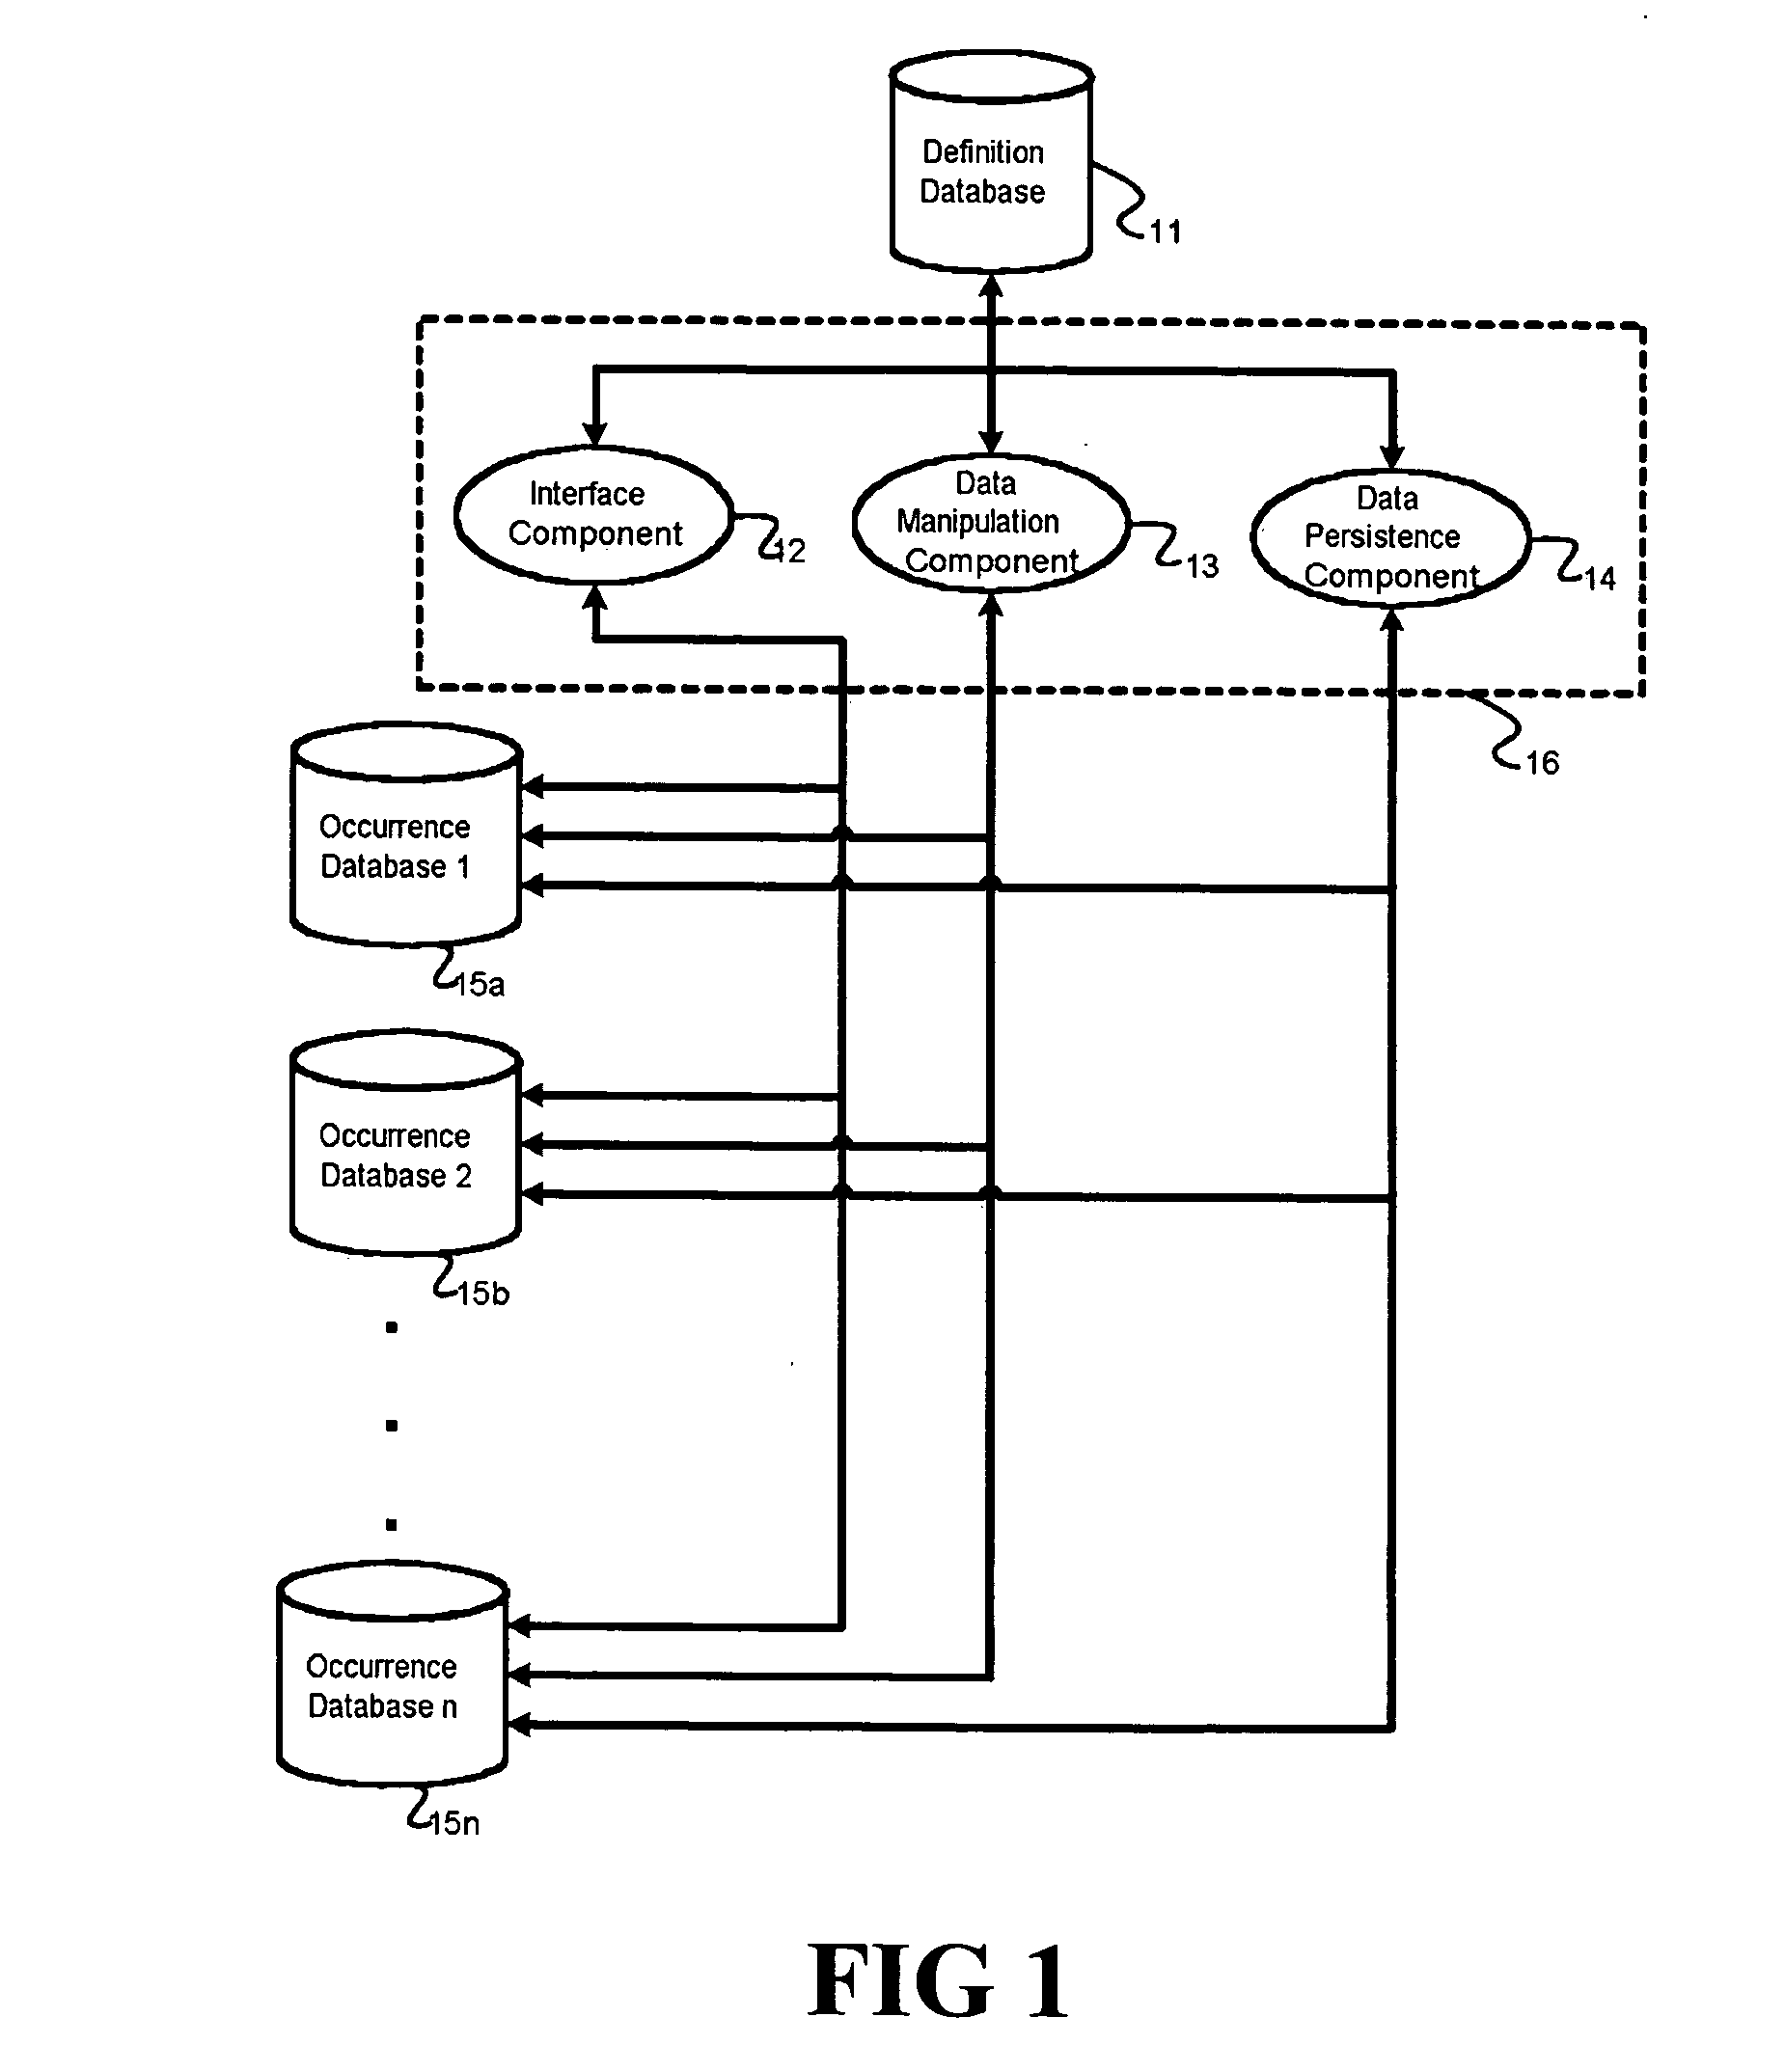 Method and apparatus for creating an adaptive application